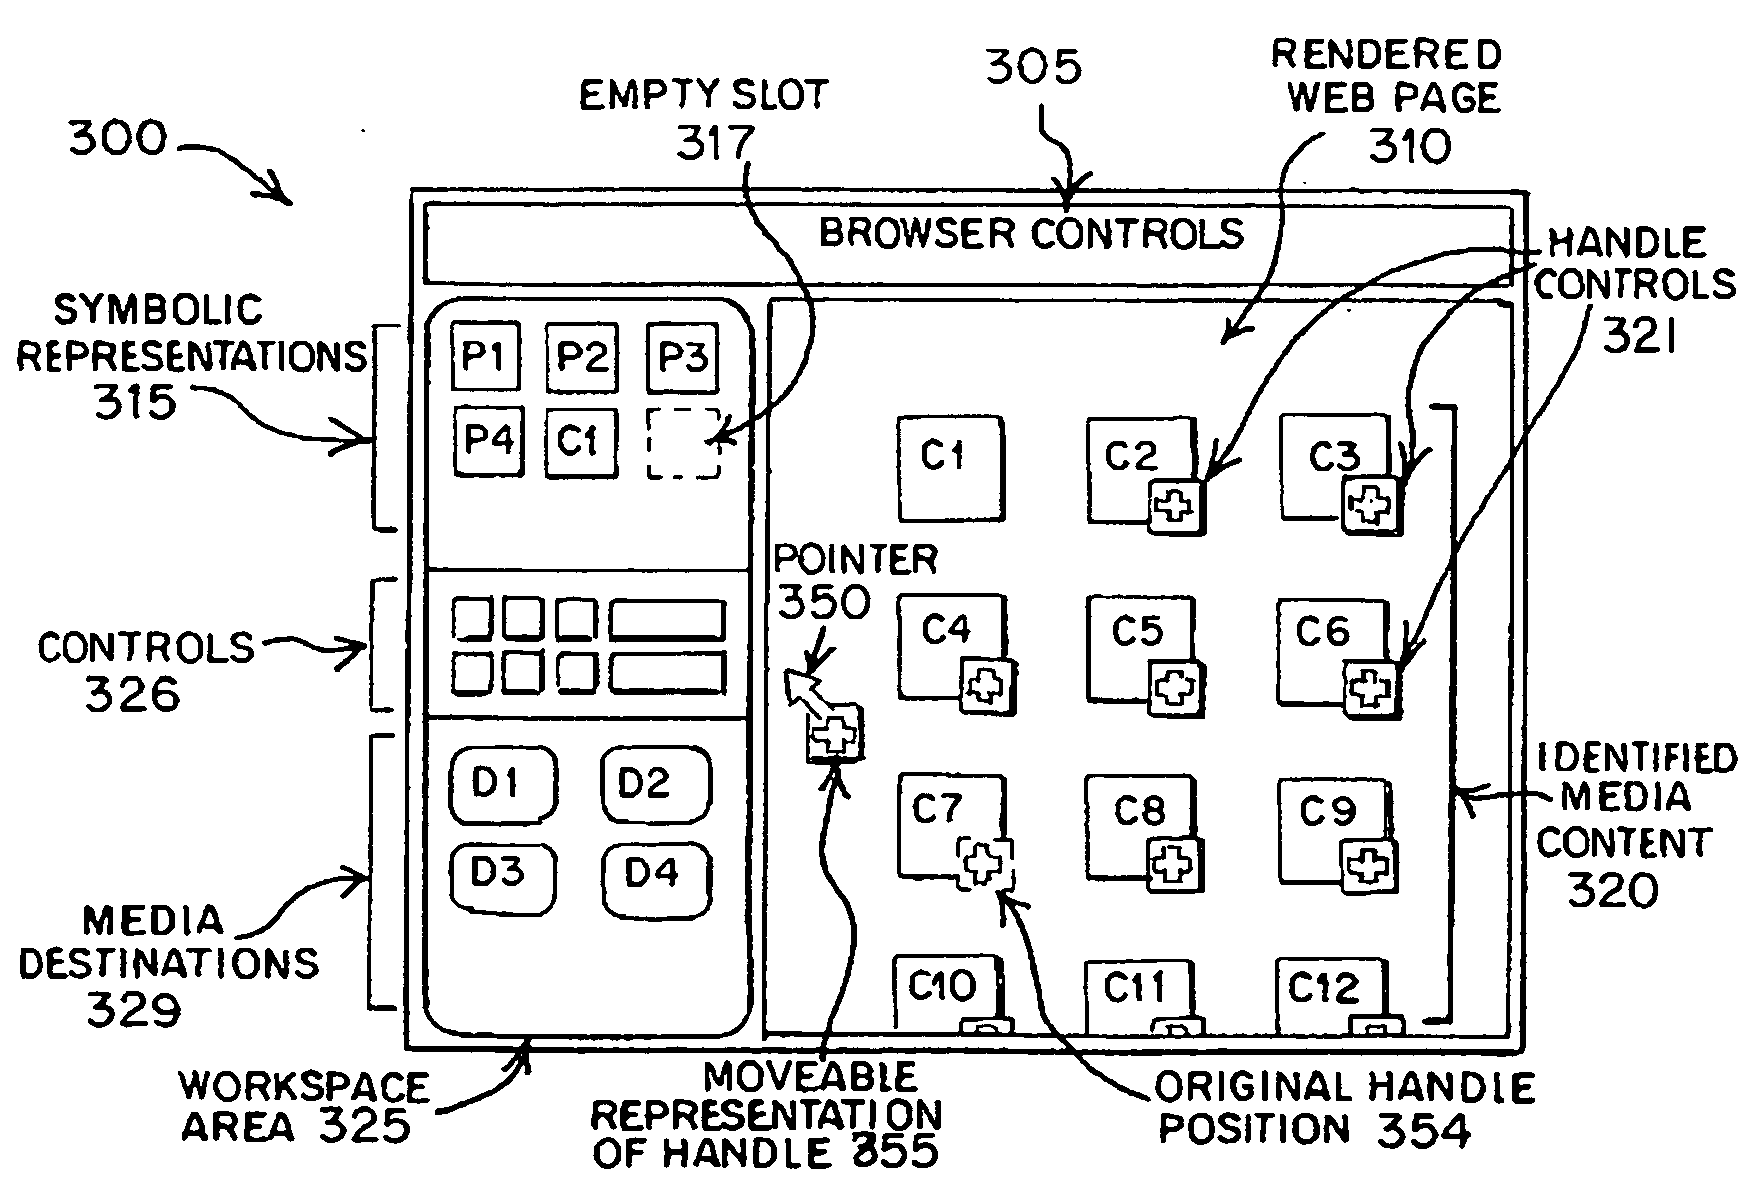 System and method for managing internet media content